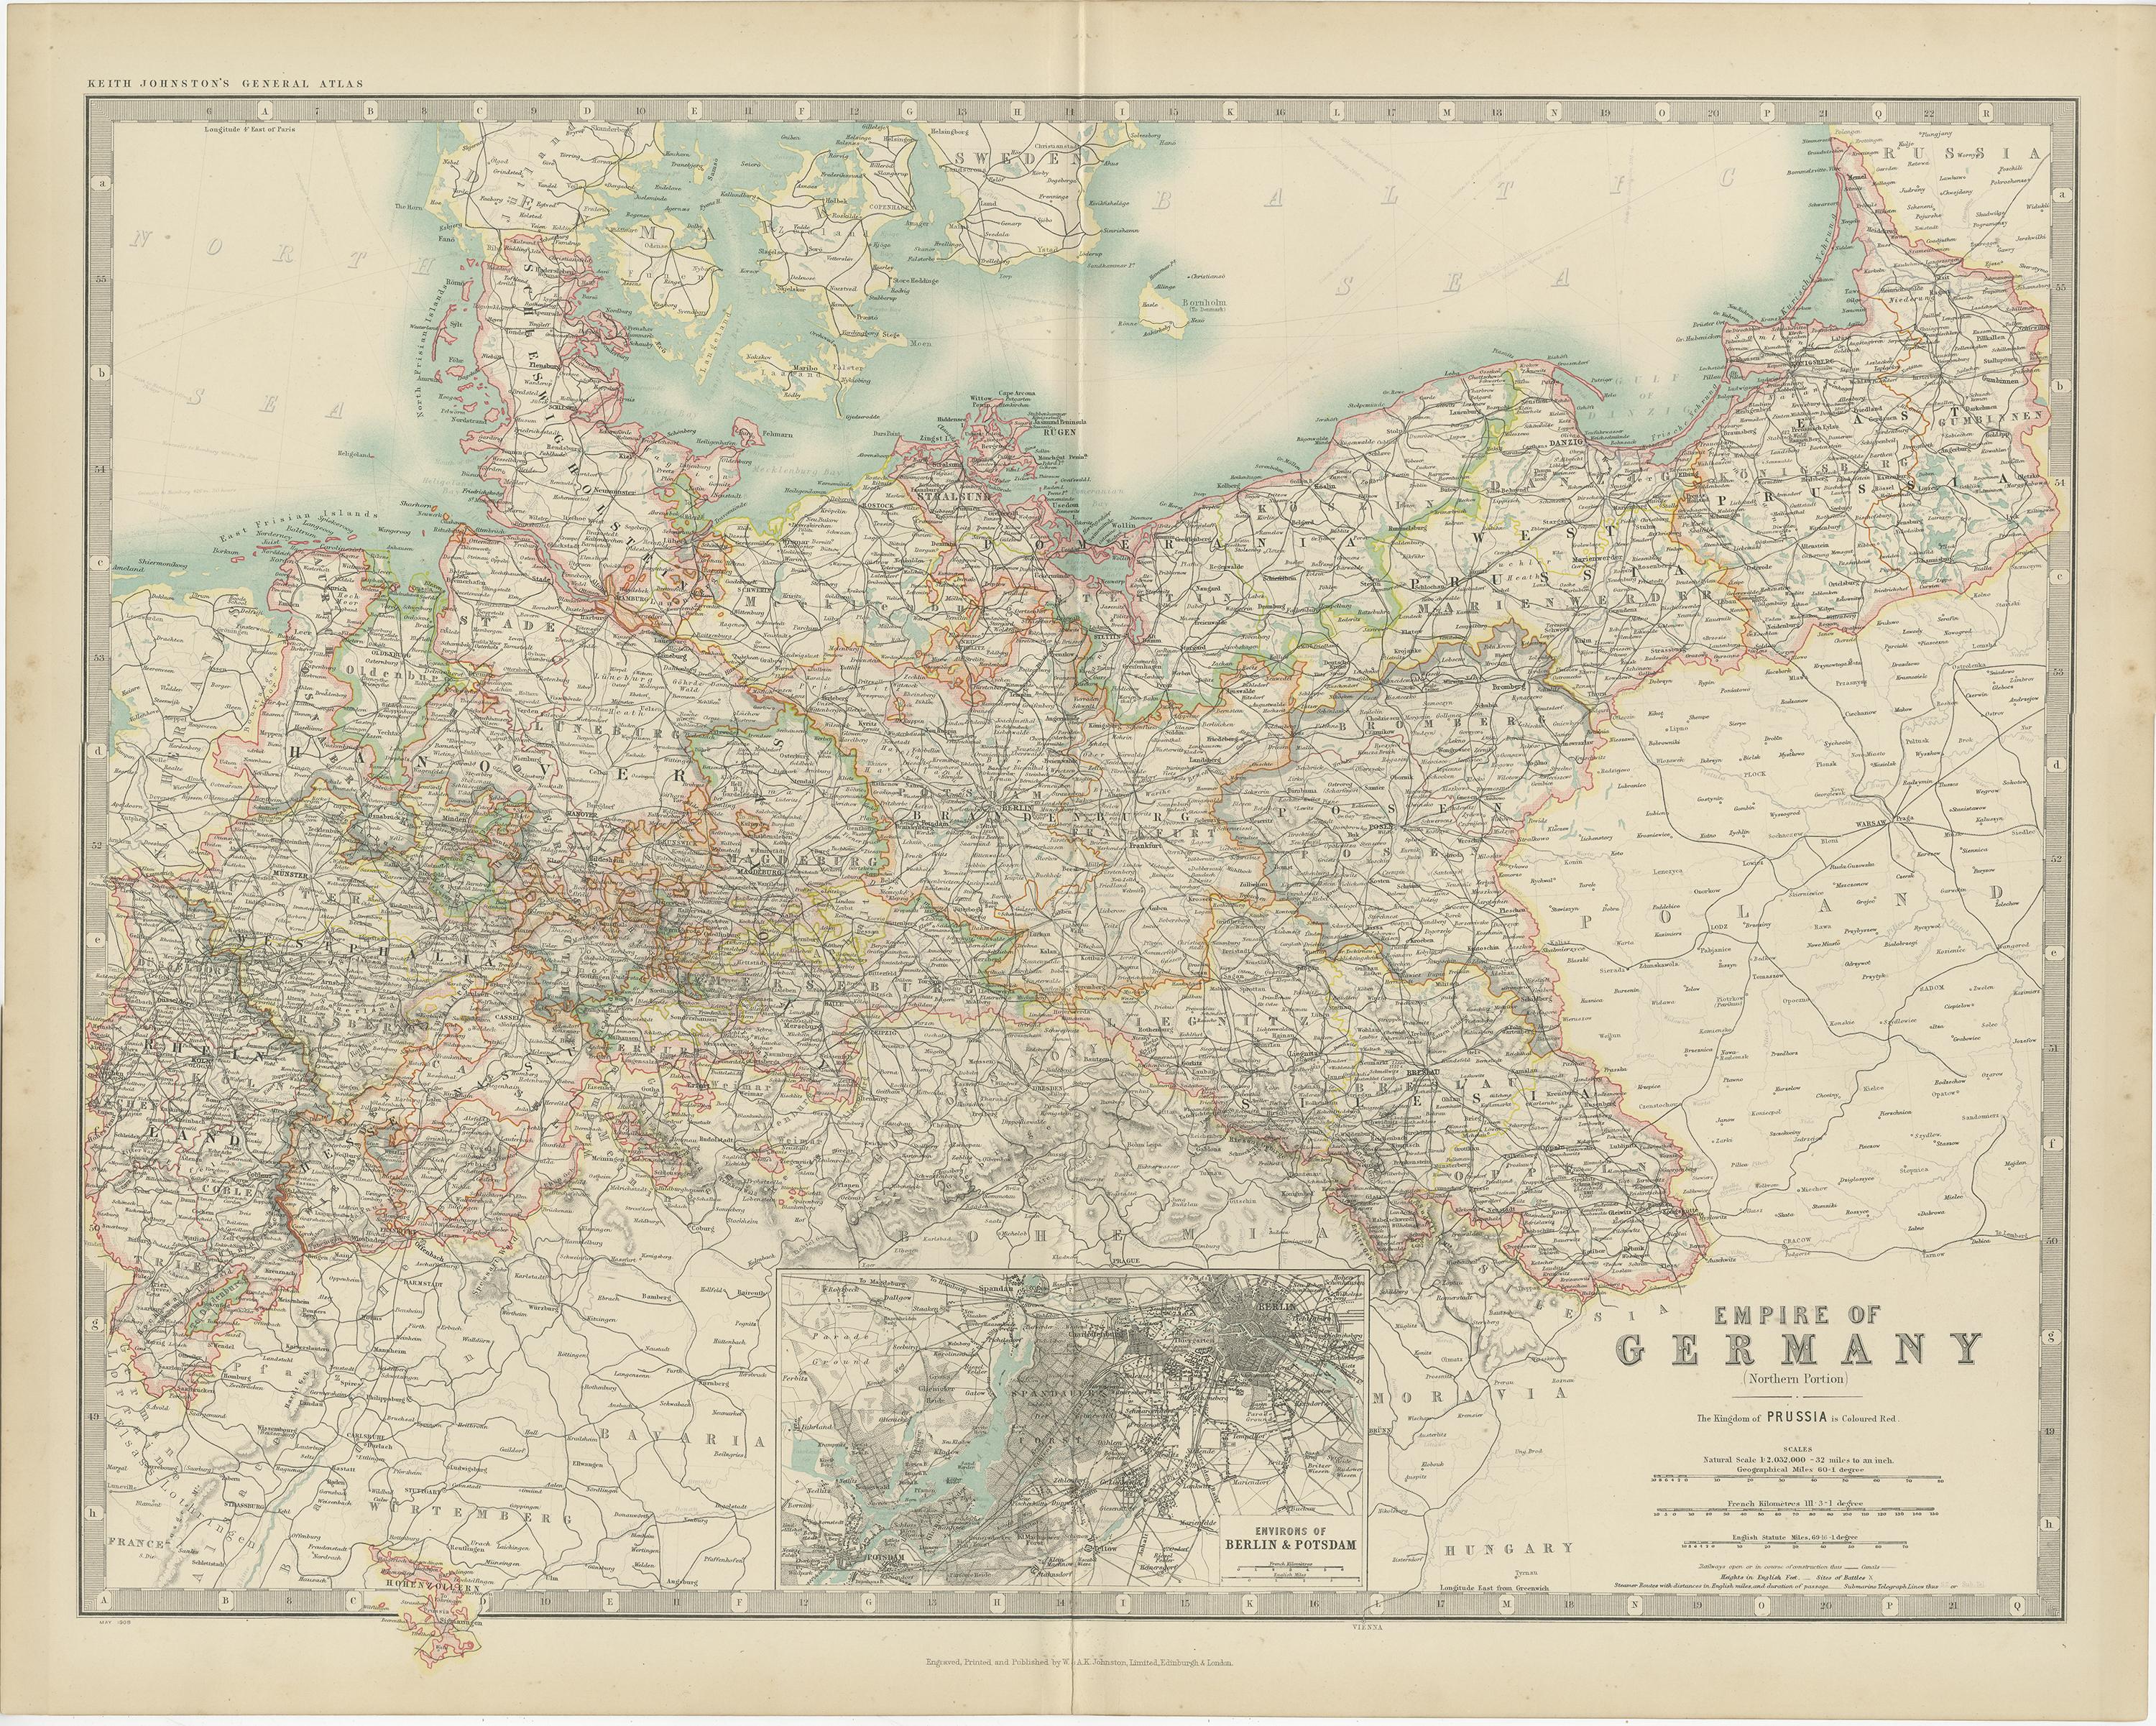 Antique map titled 'Empire of Germany'. Original antique map of the German Empire. With inset maps of Berlin and Potsdam. This map originates from the ‘Royal Atlas of Modern Geography’. Published by W. & A.K. Johnston, 1909.